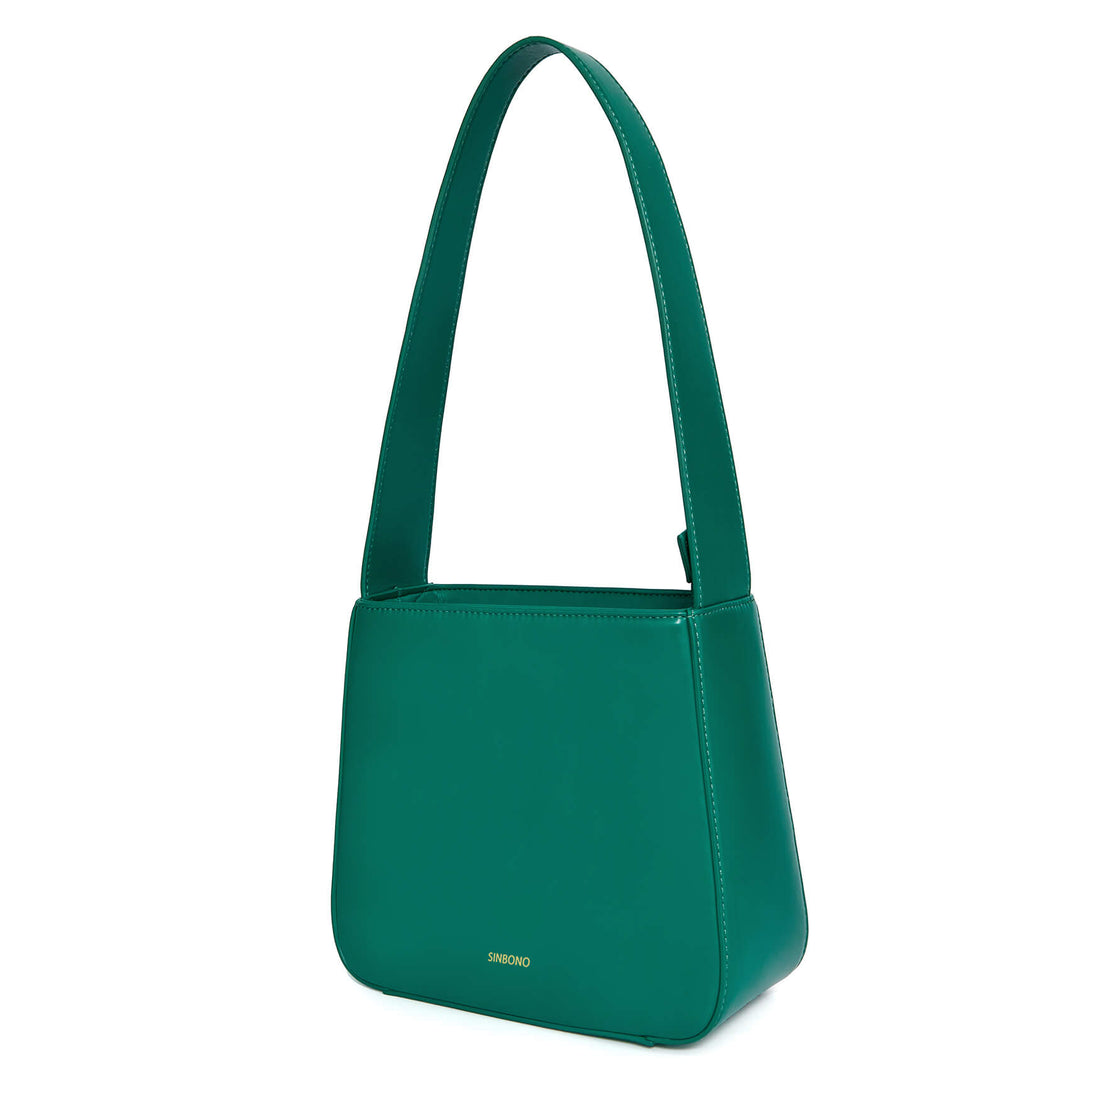 SINBONO Betty Shoulder Bag Green - Top Quality Leather Bag